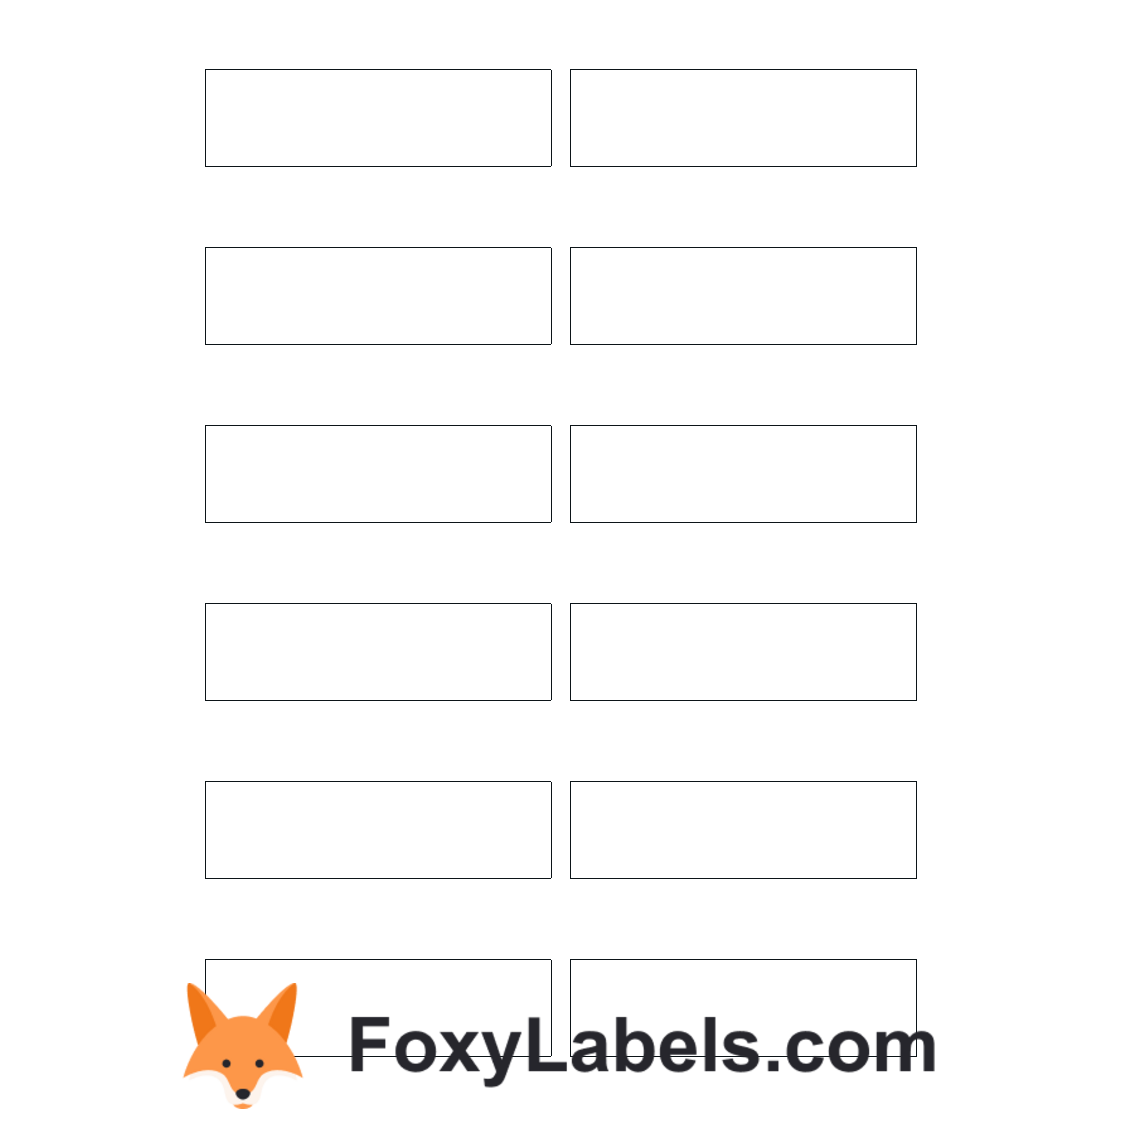 Herma 5072 label template for Google Docs